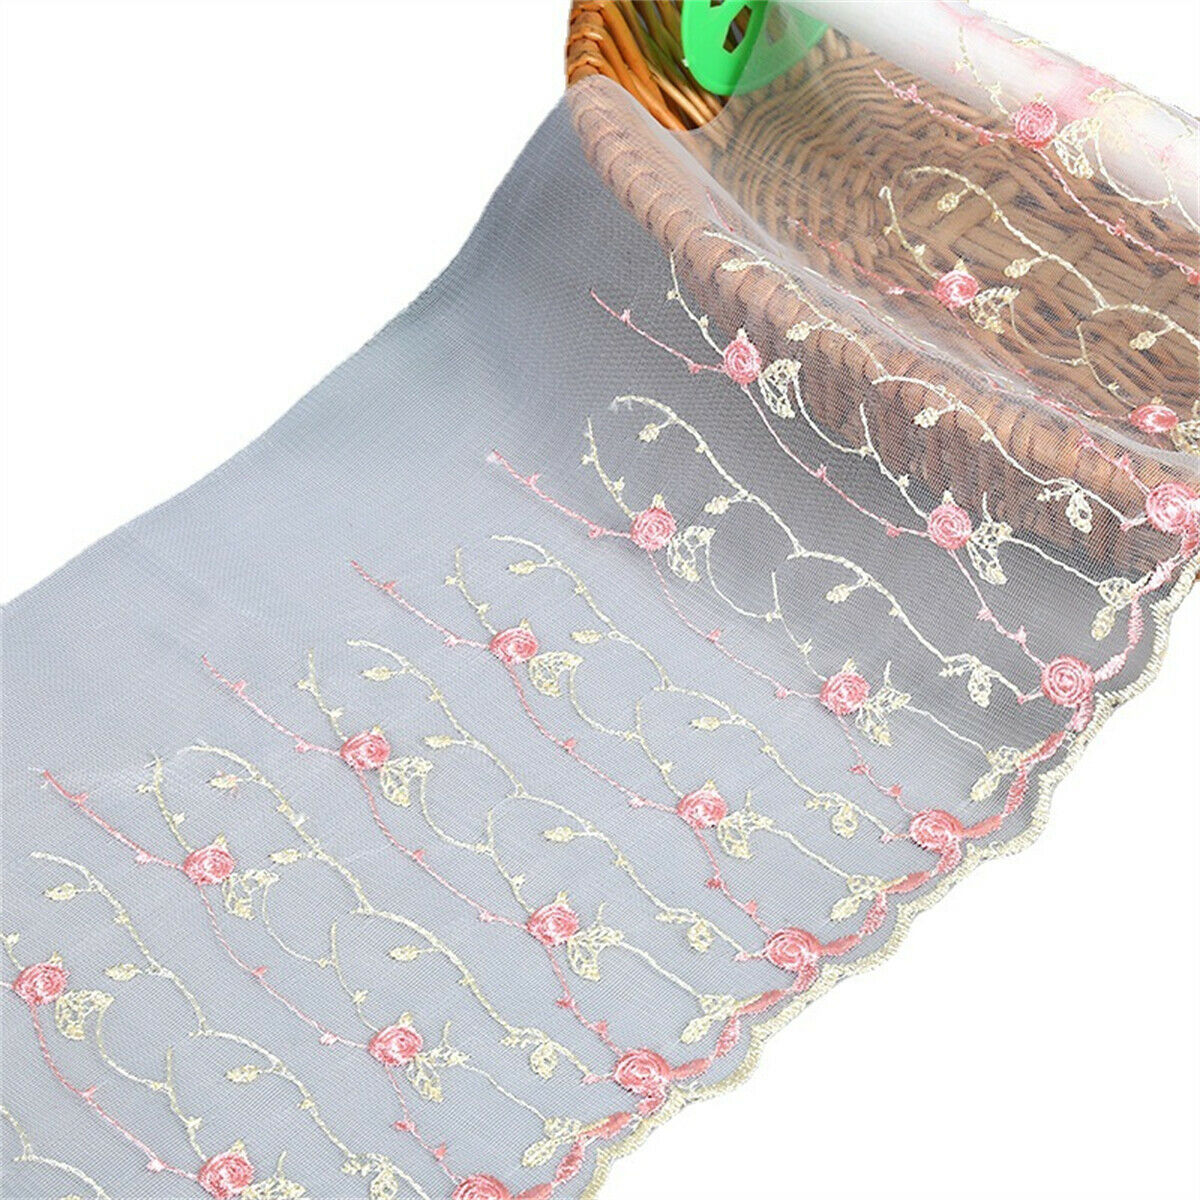 1 Yard Pink Embroidery Lace Dress Skirt DIY Accessories Trimming Sewing Applique